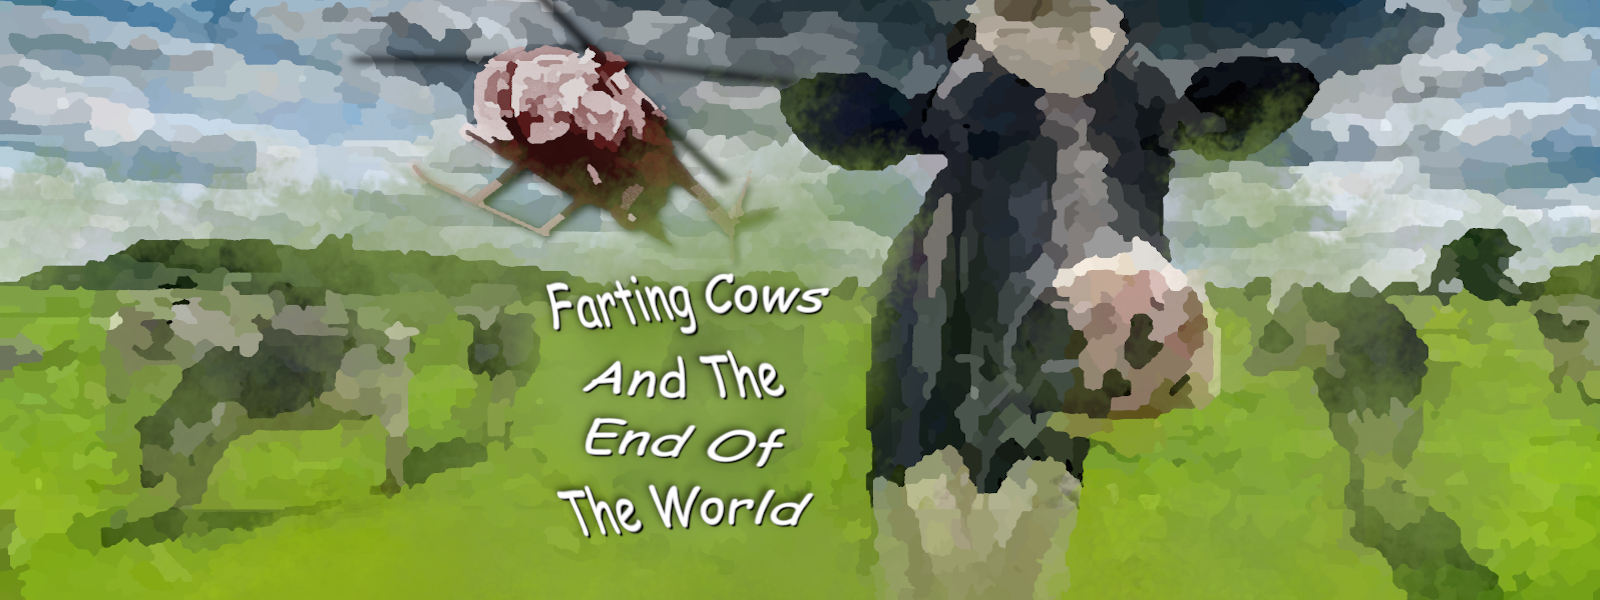 Farting Cows Cover Art